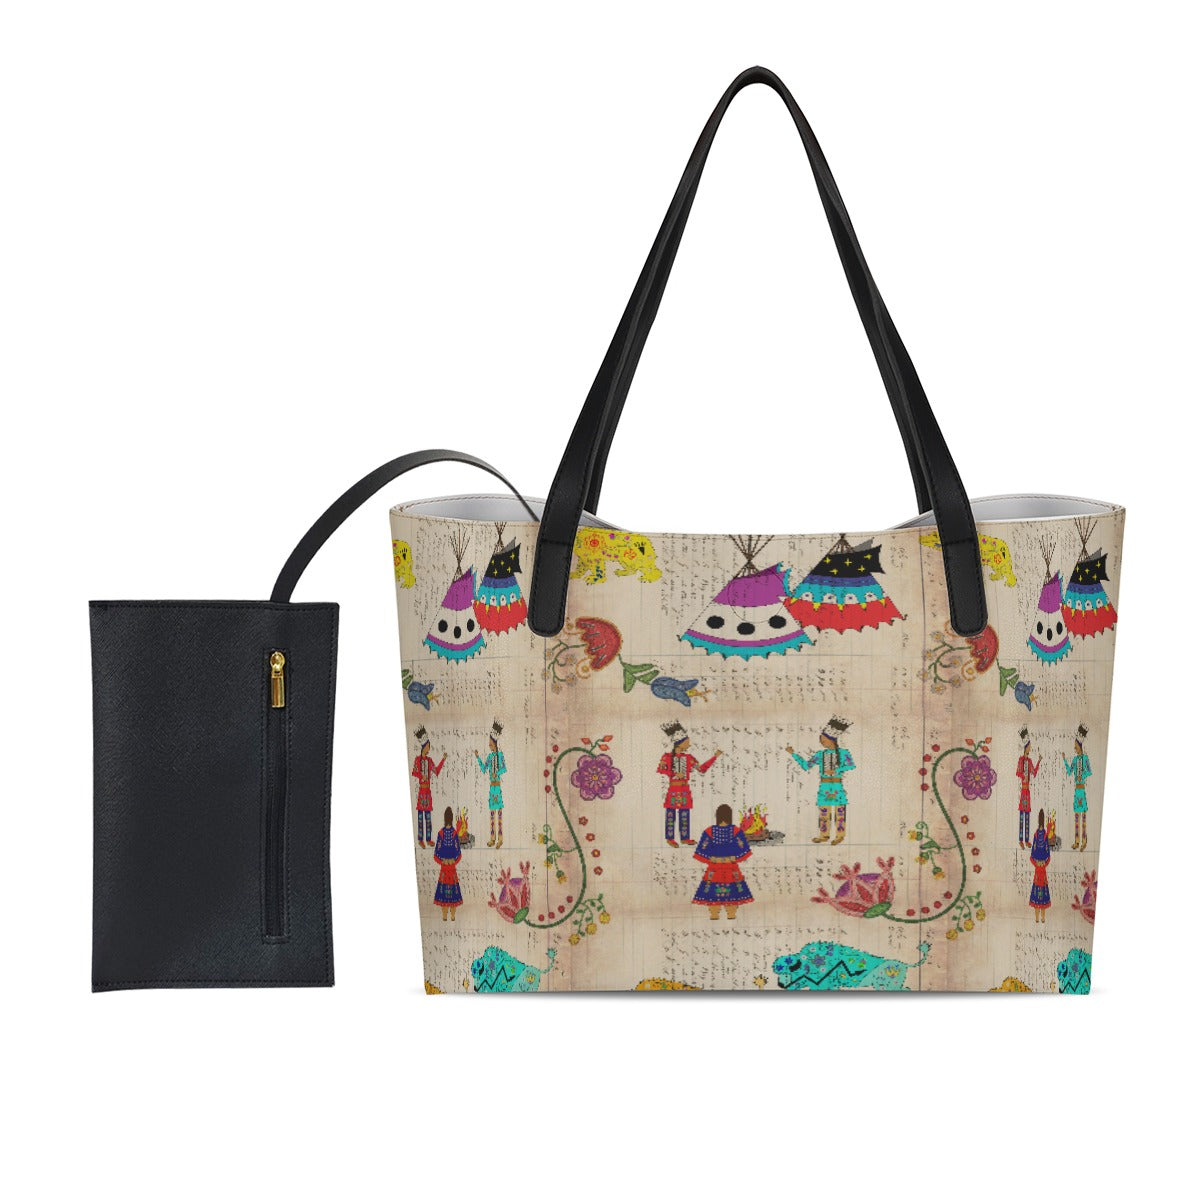 Floral Ledger Way of Life Shopping Tote Bag With Black Mini Purse